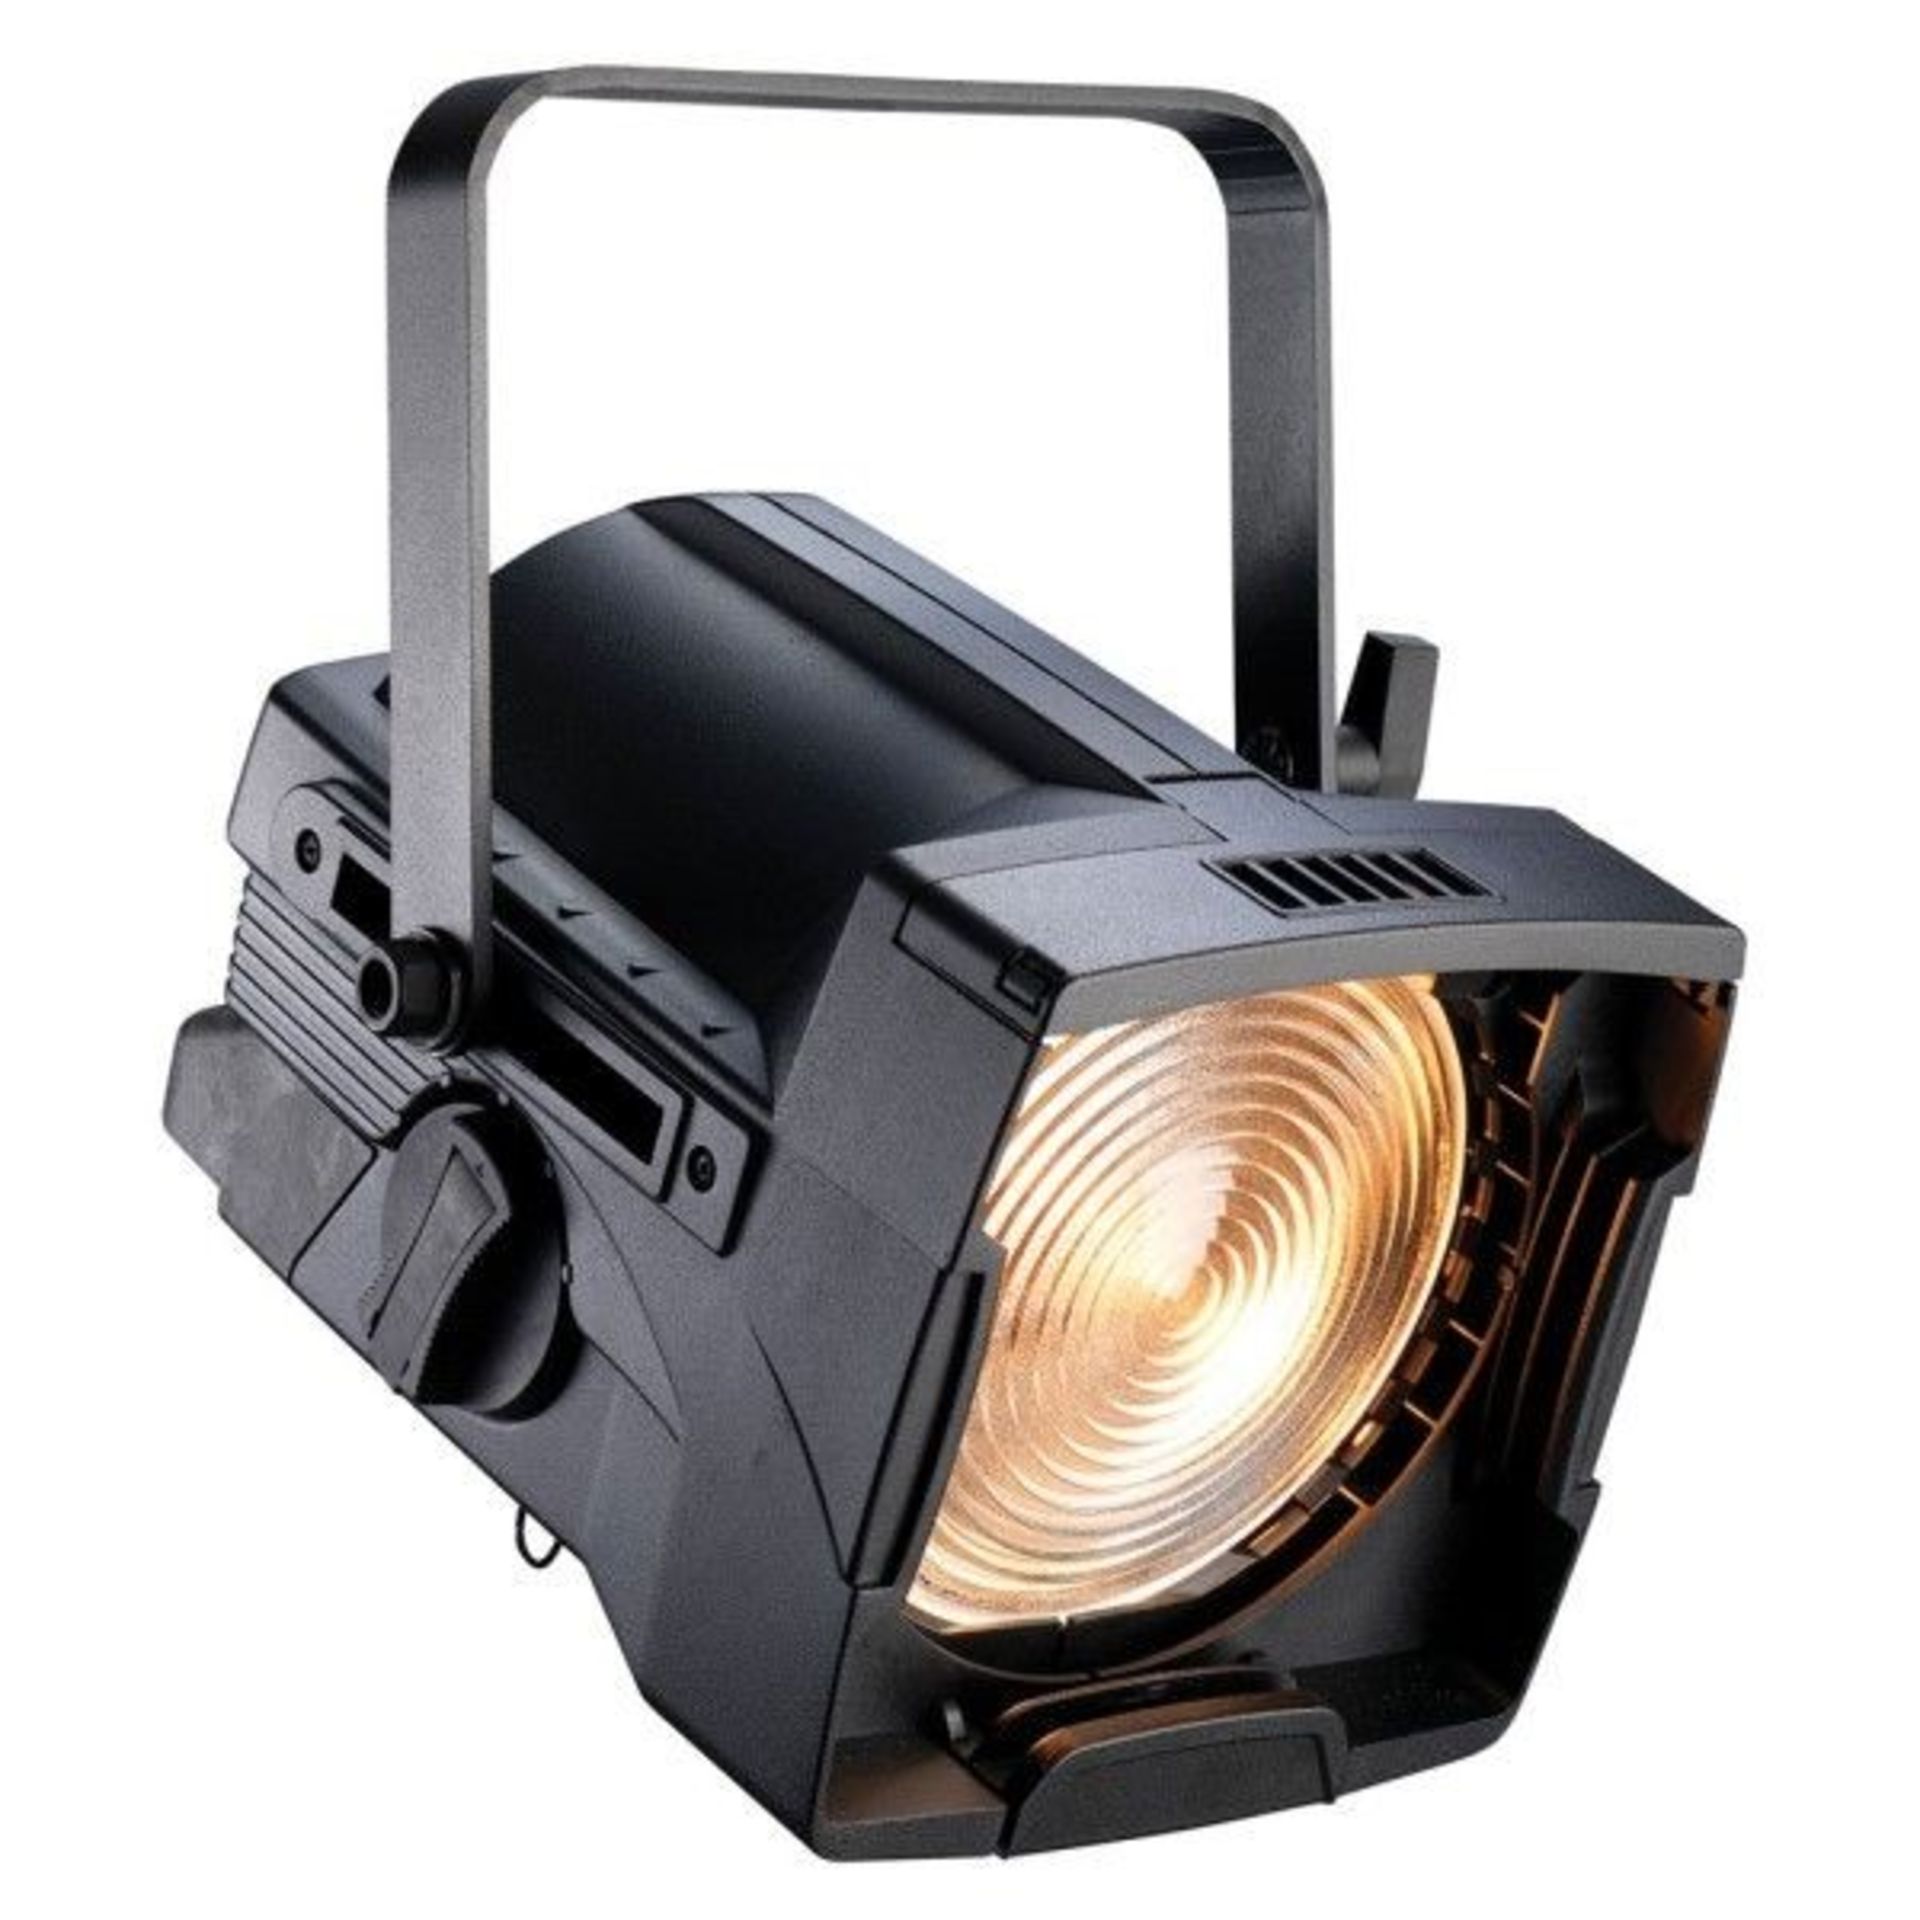 6 x Source Four S4 Fresnel Lights With Gel Holders, Barn Doors & Safety Cables - In Flight Case